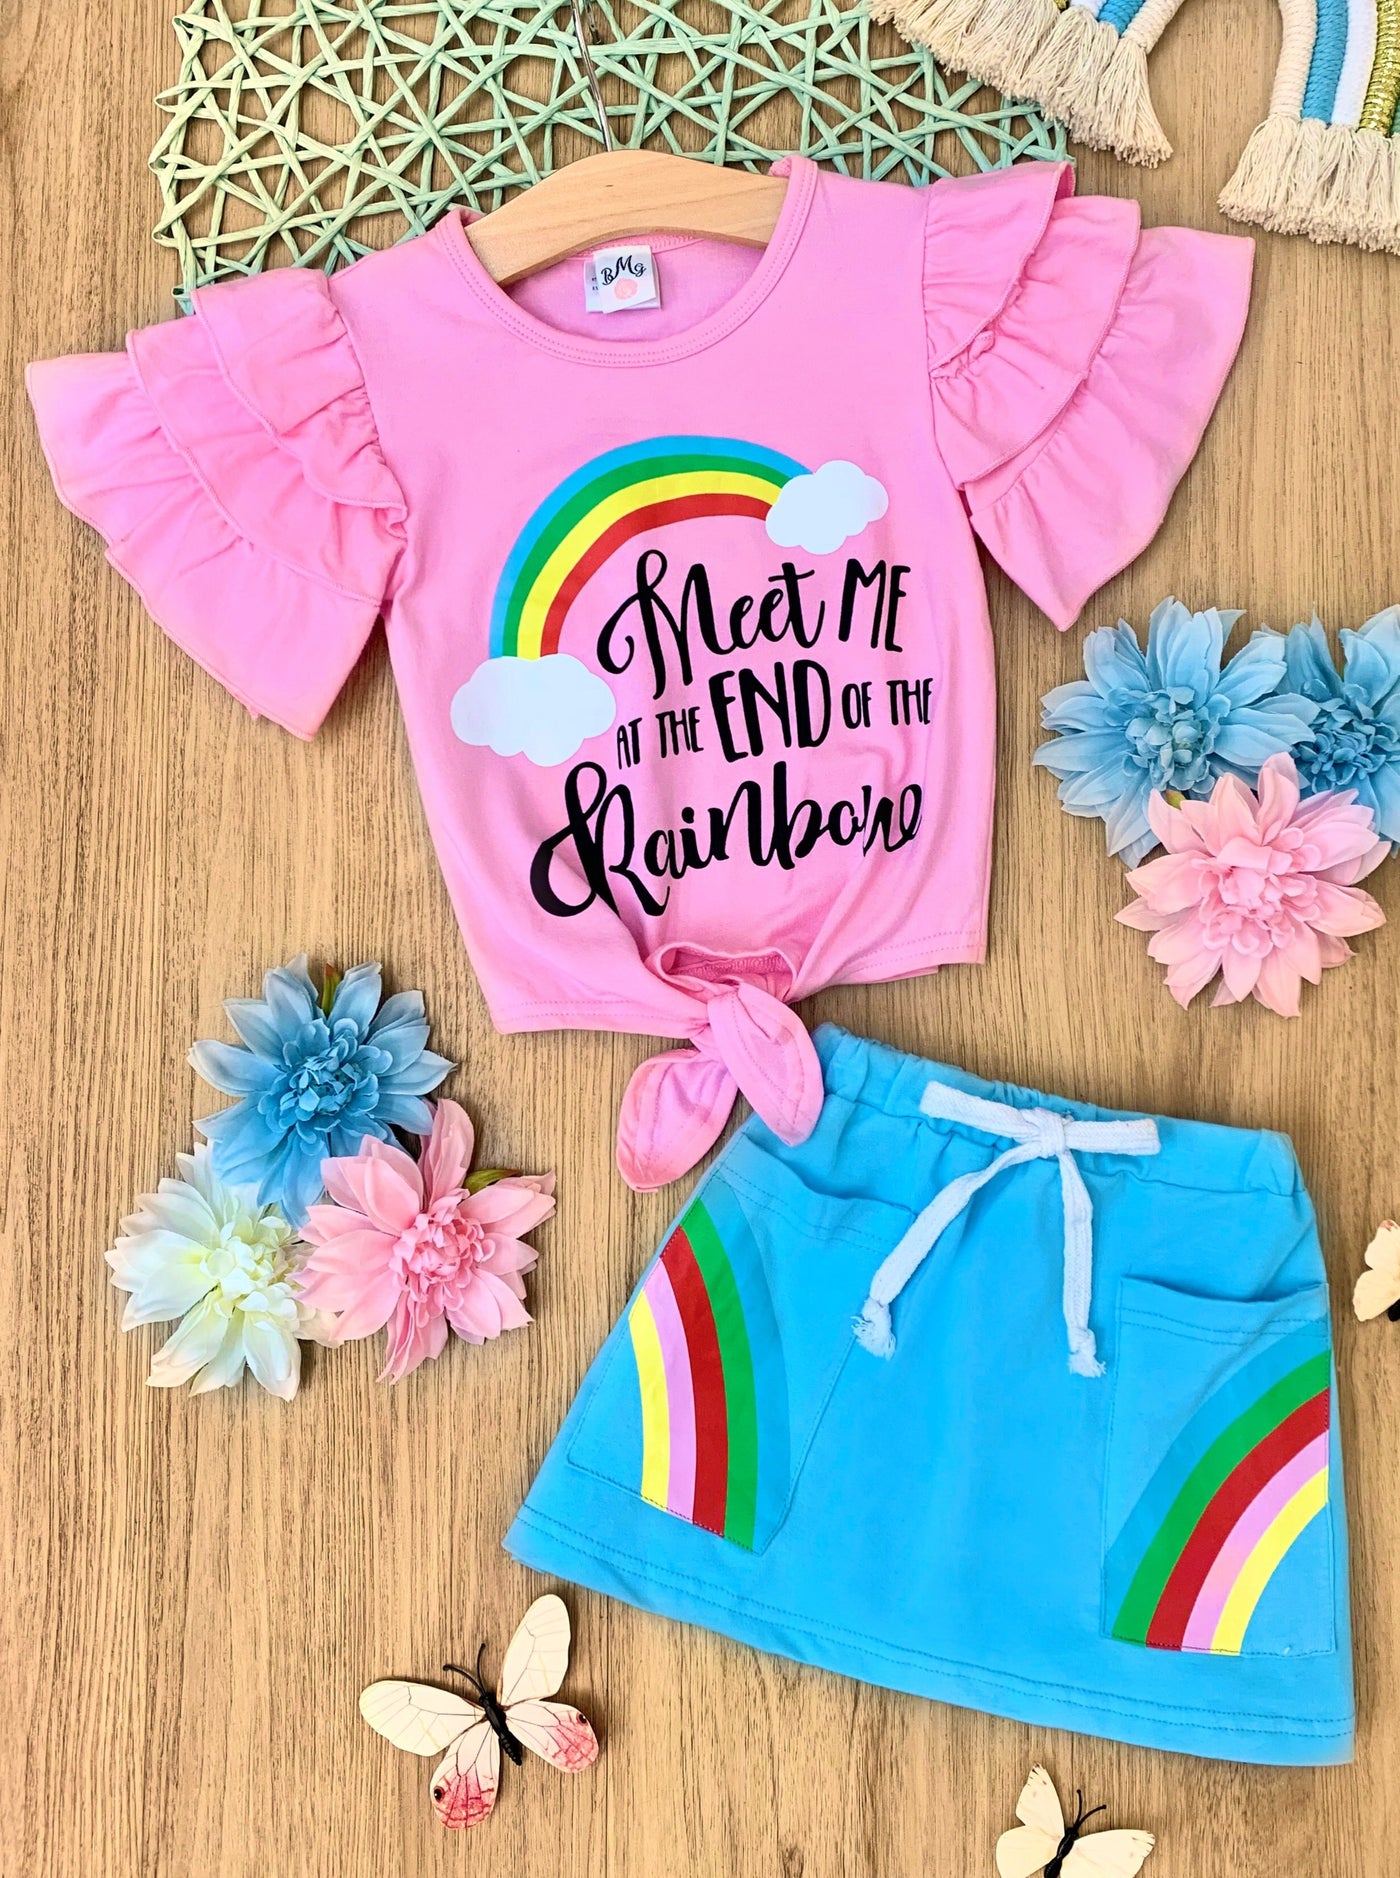 Girls set features a pink knot hem top with multi-layer ruffled sleeves and "Meet me at the end of the rainbow" graphic print and a blue skirt with built-in drawstrings and rainbow front pockets